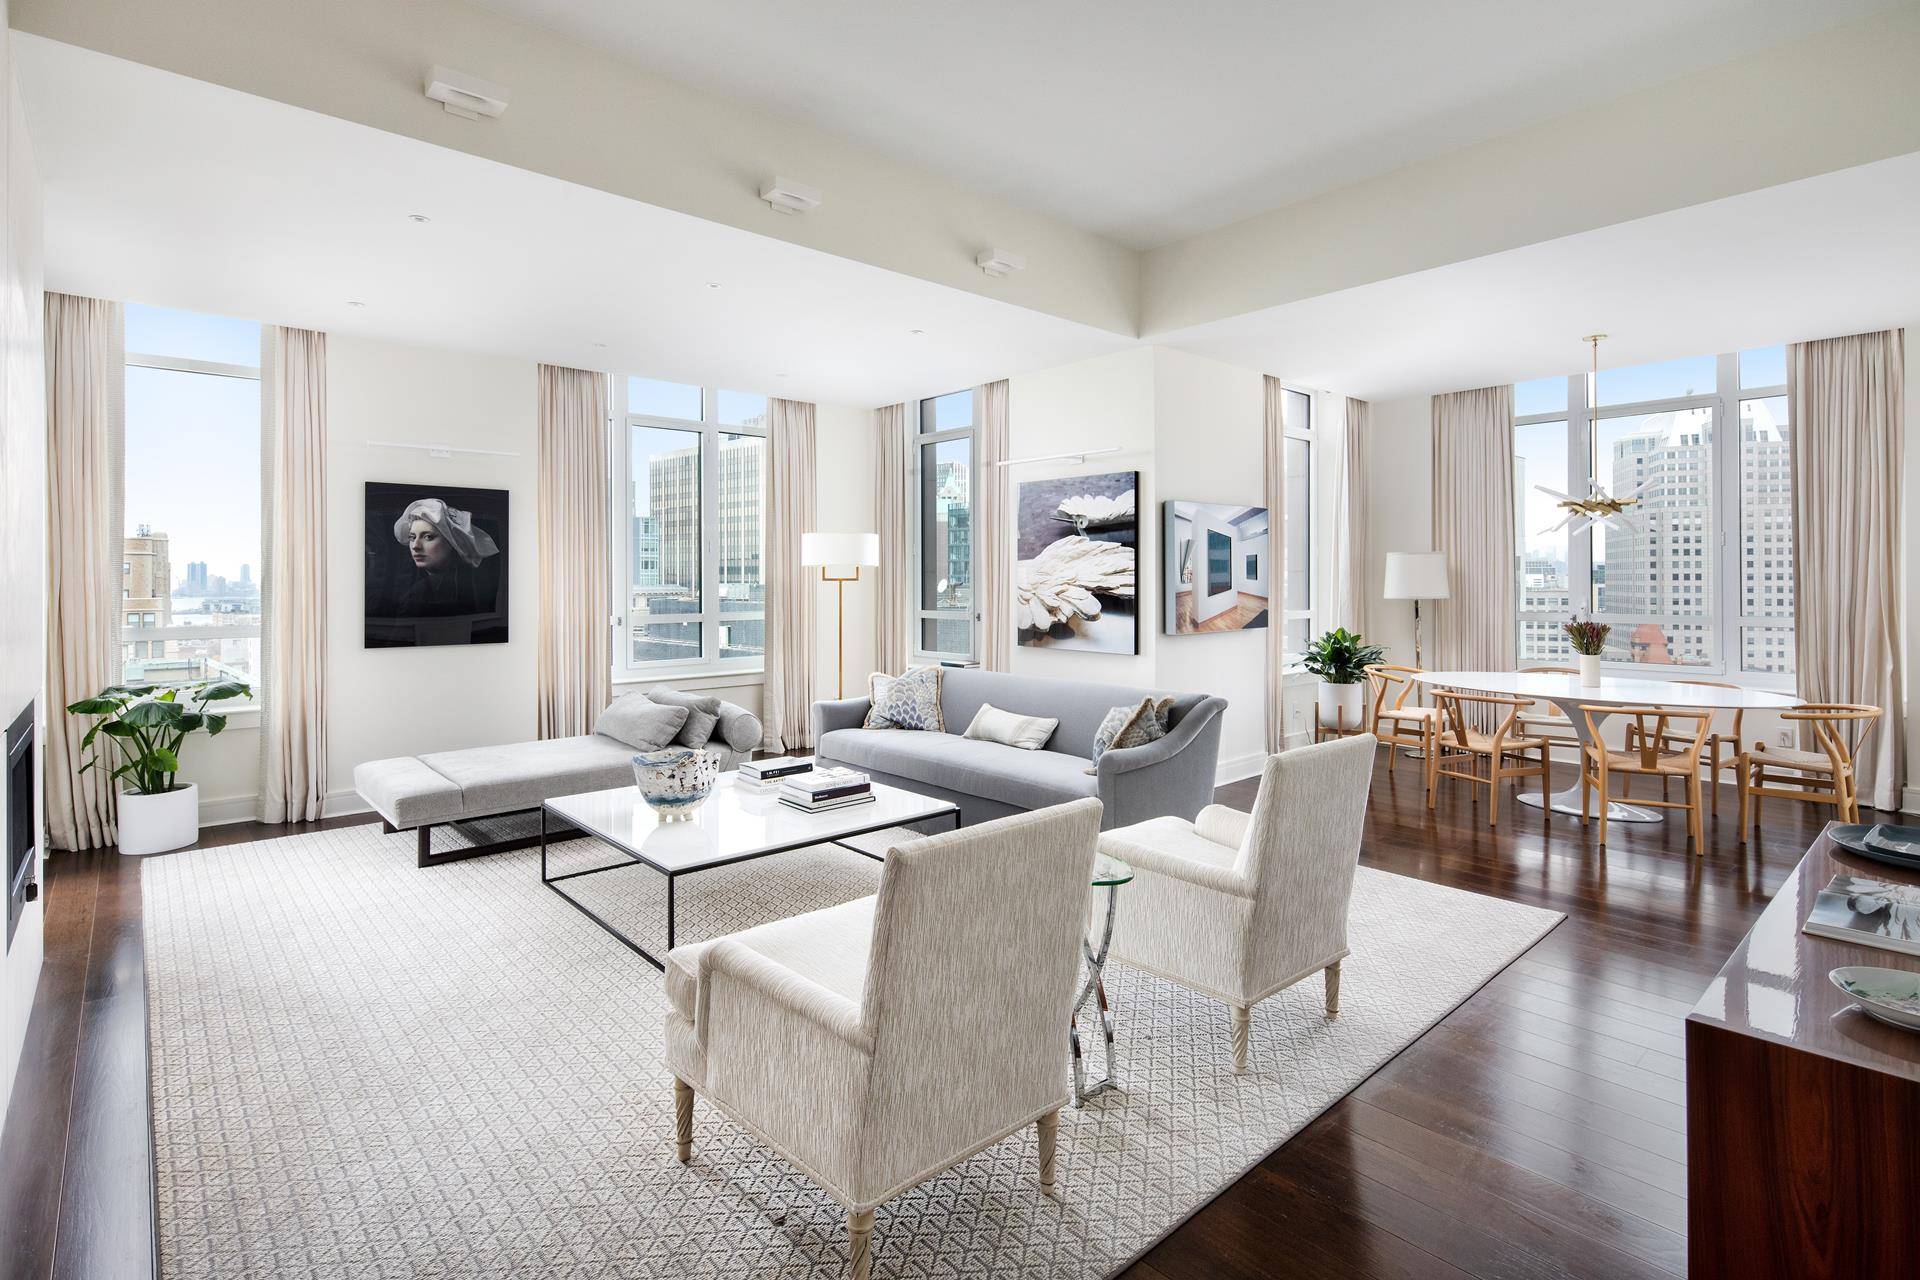 The best of modern Brooklyn living awaits in this breathtaking three bedroom, three and a half bathroom residence with expansive designer interiors, two private terraces and world class amenities including ...